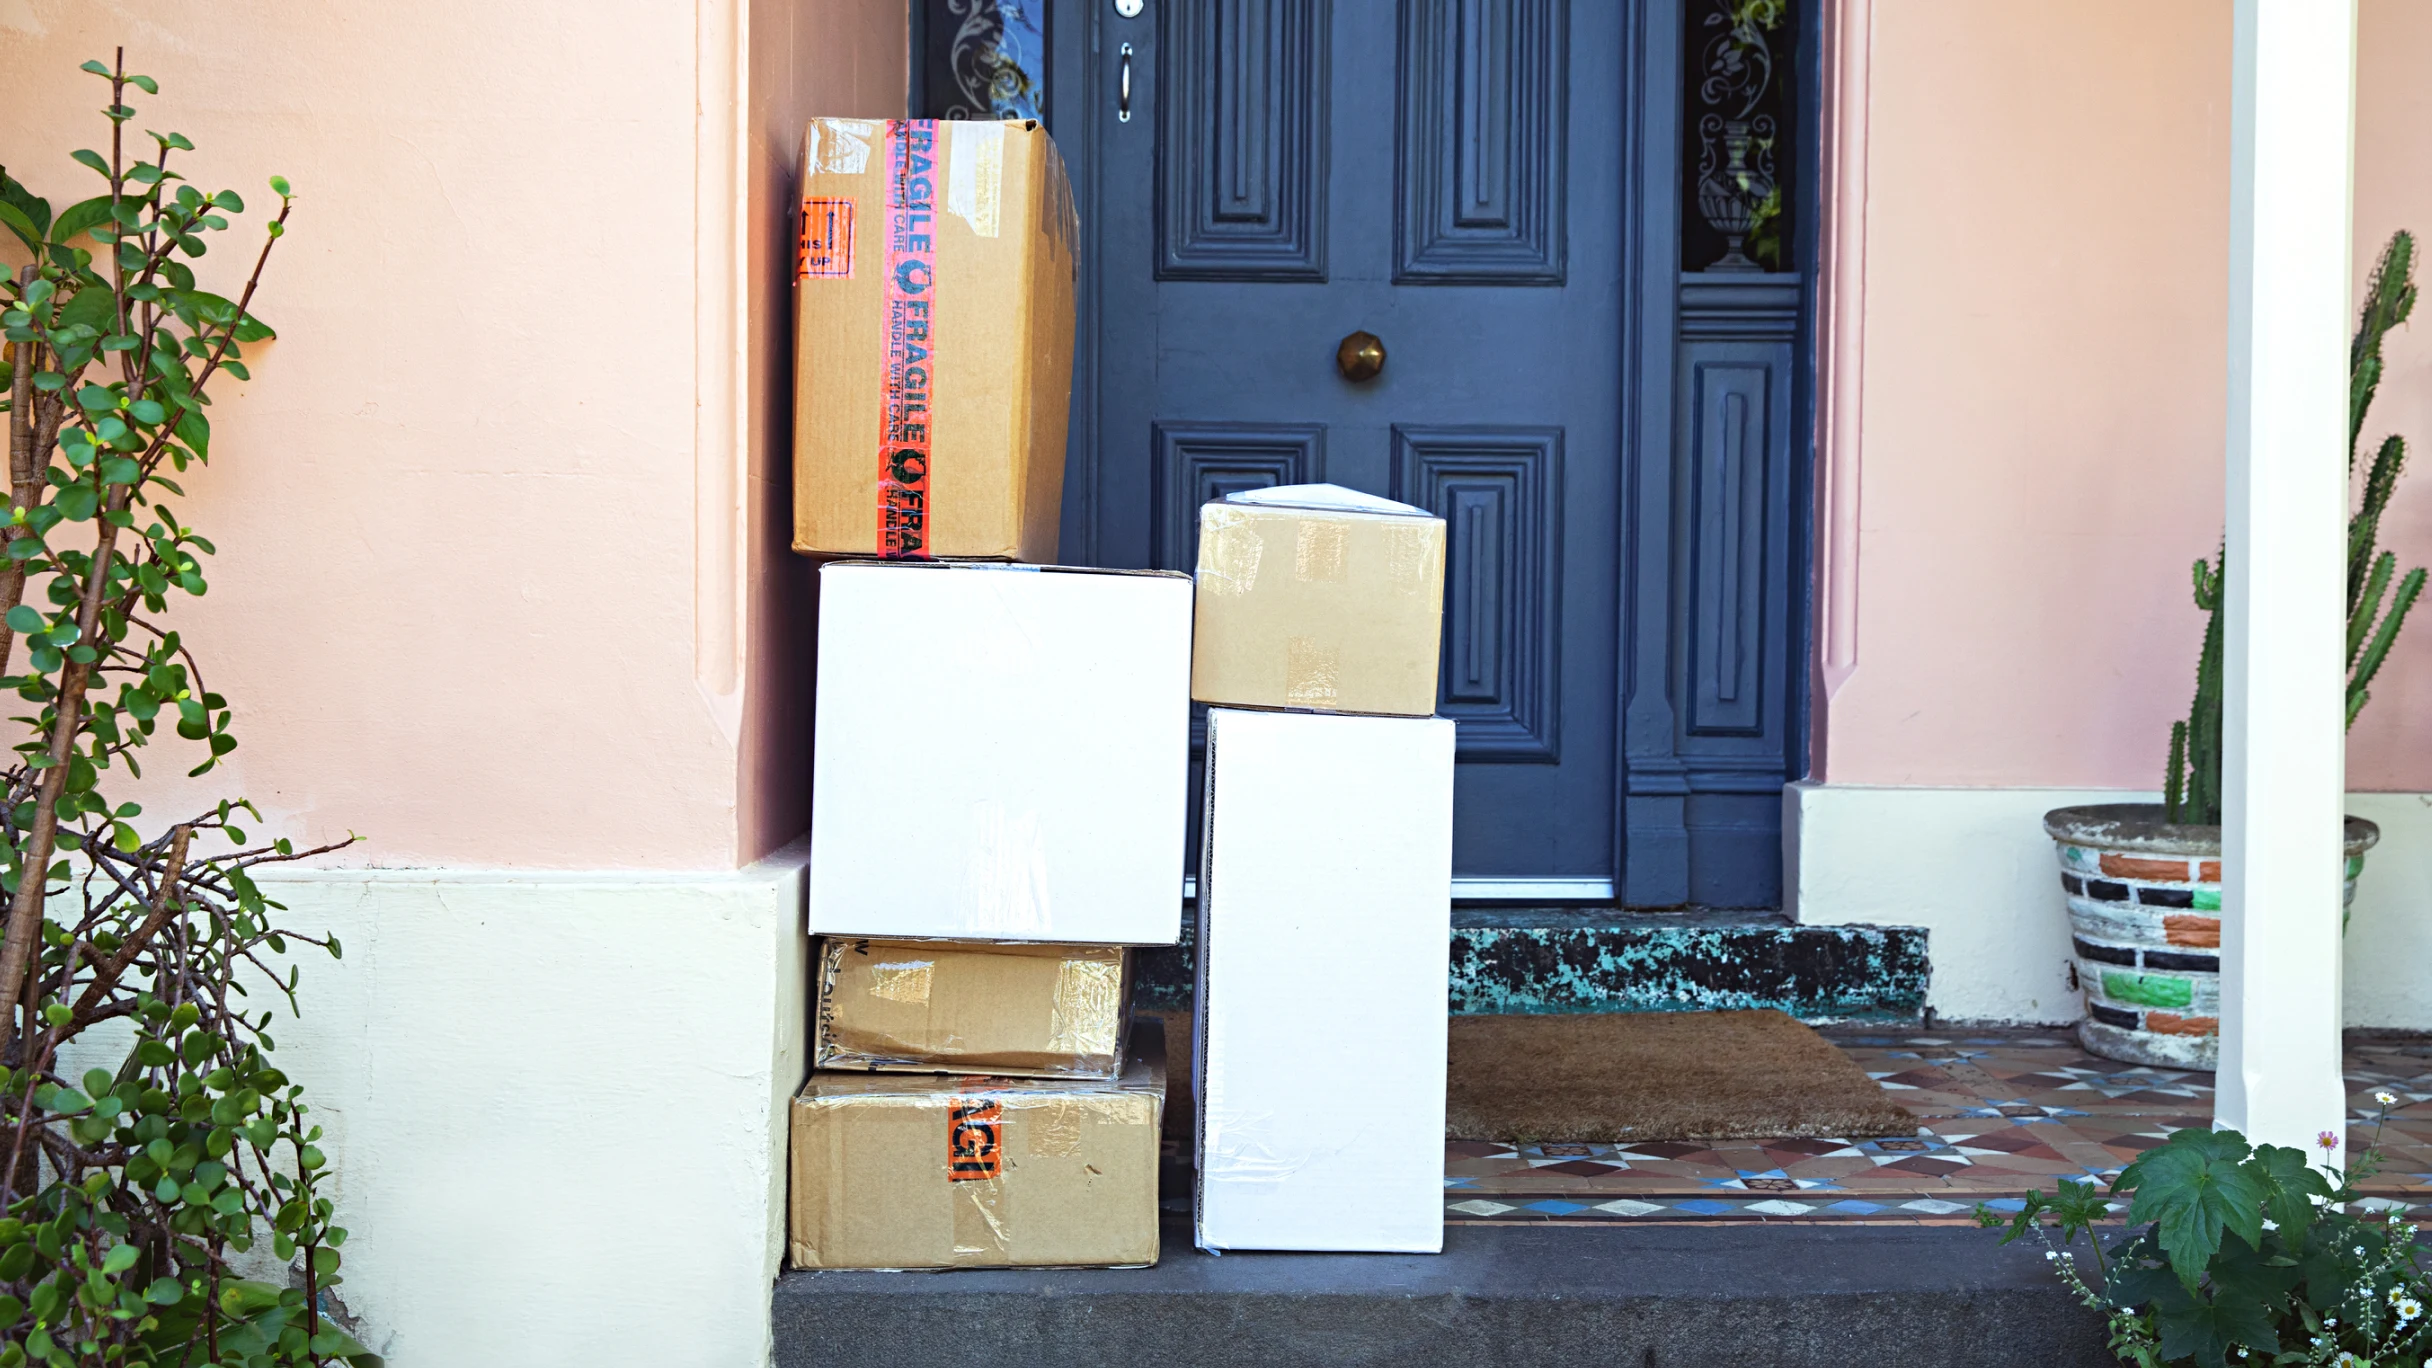 Six packages stacked on top of each other on the porch of a home. 